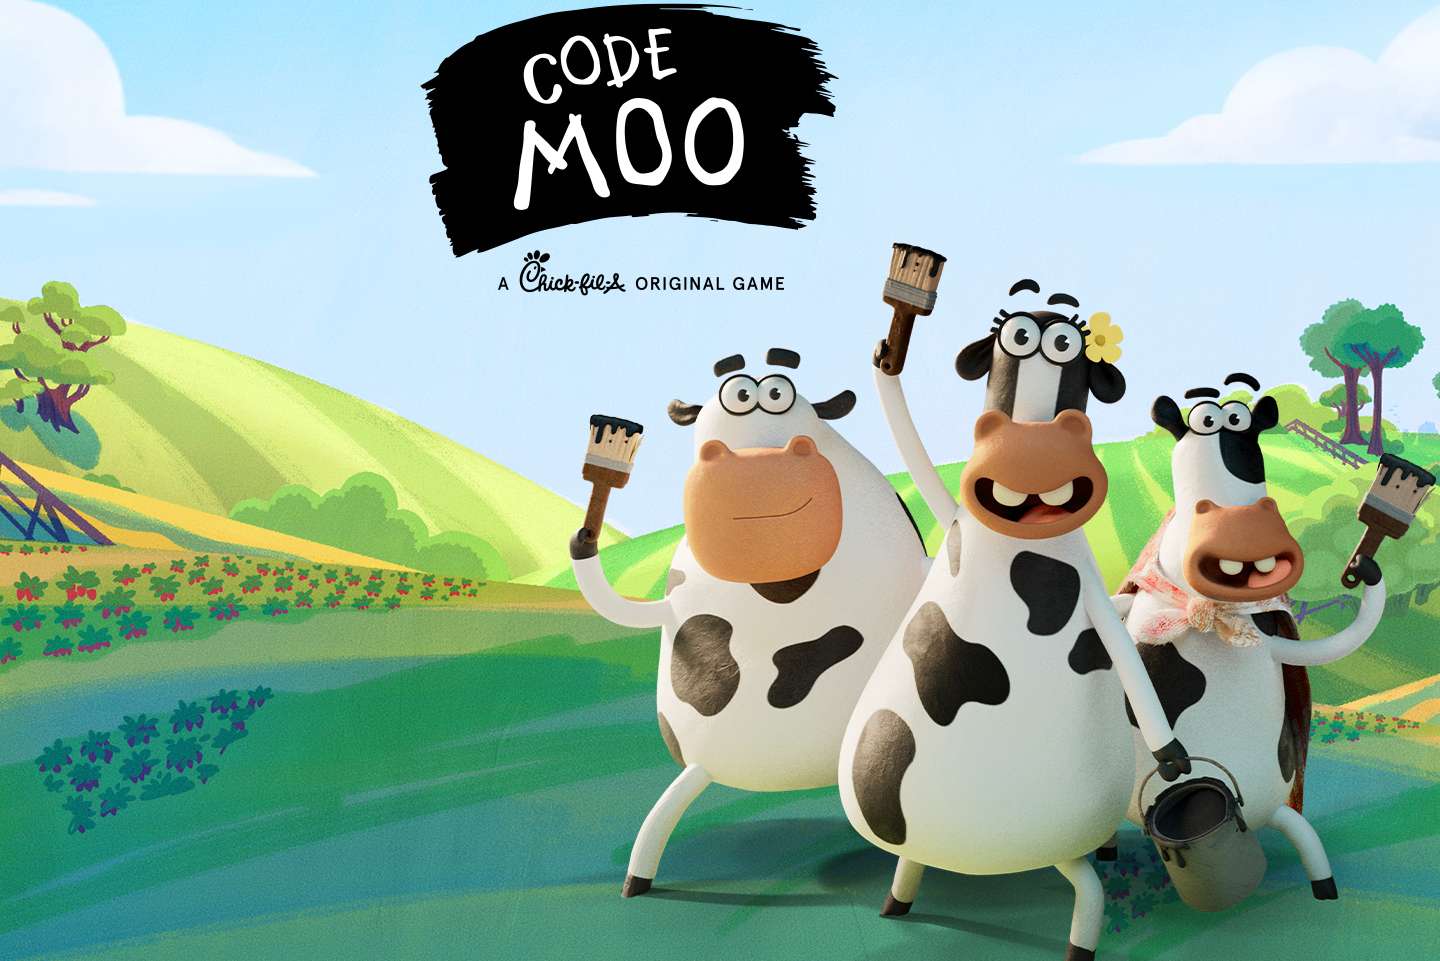 ChickfilA debuts a new mobile game featuring its signature cows